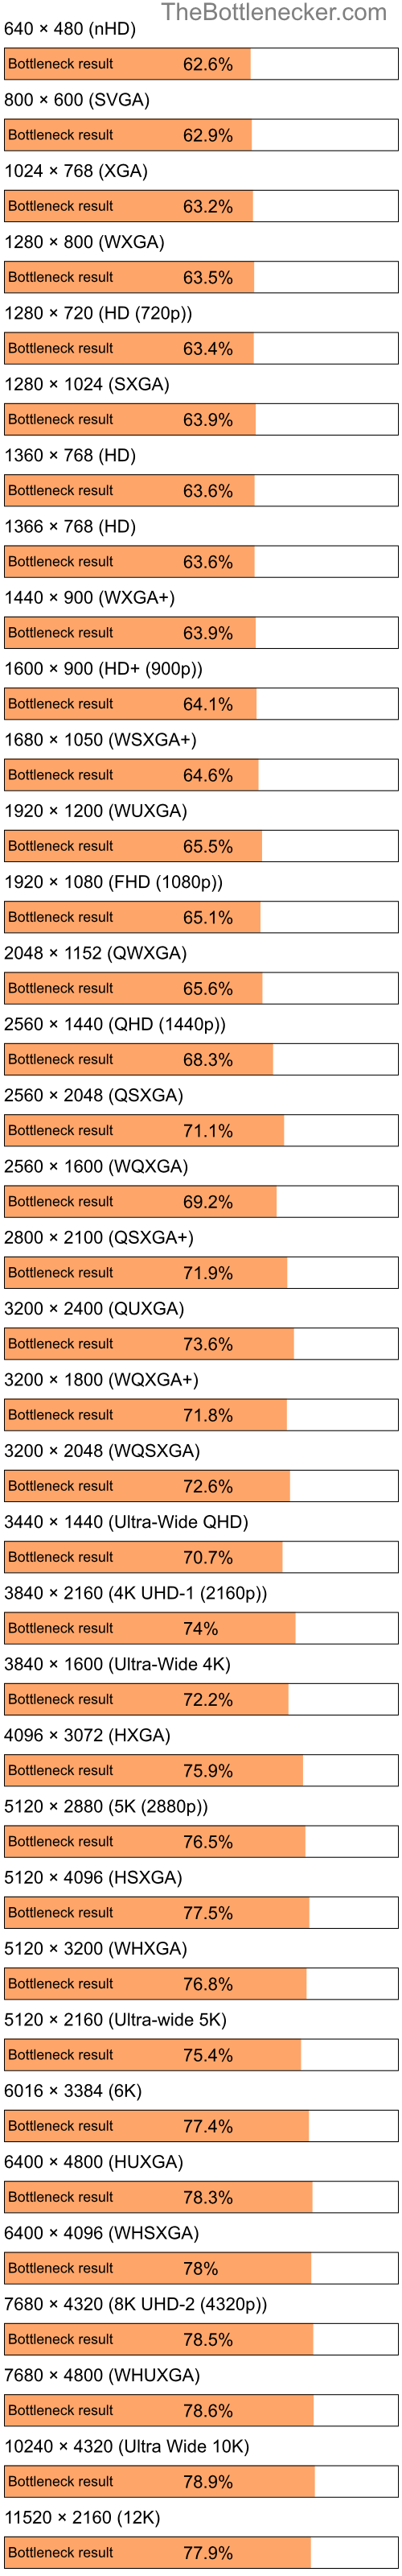 Bottleneck results by resolution for Intel Atom N280 and AMD Mobility Radeon HD 4225 in Processor Intense Tasks